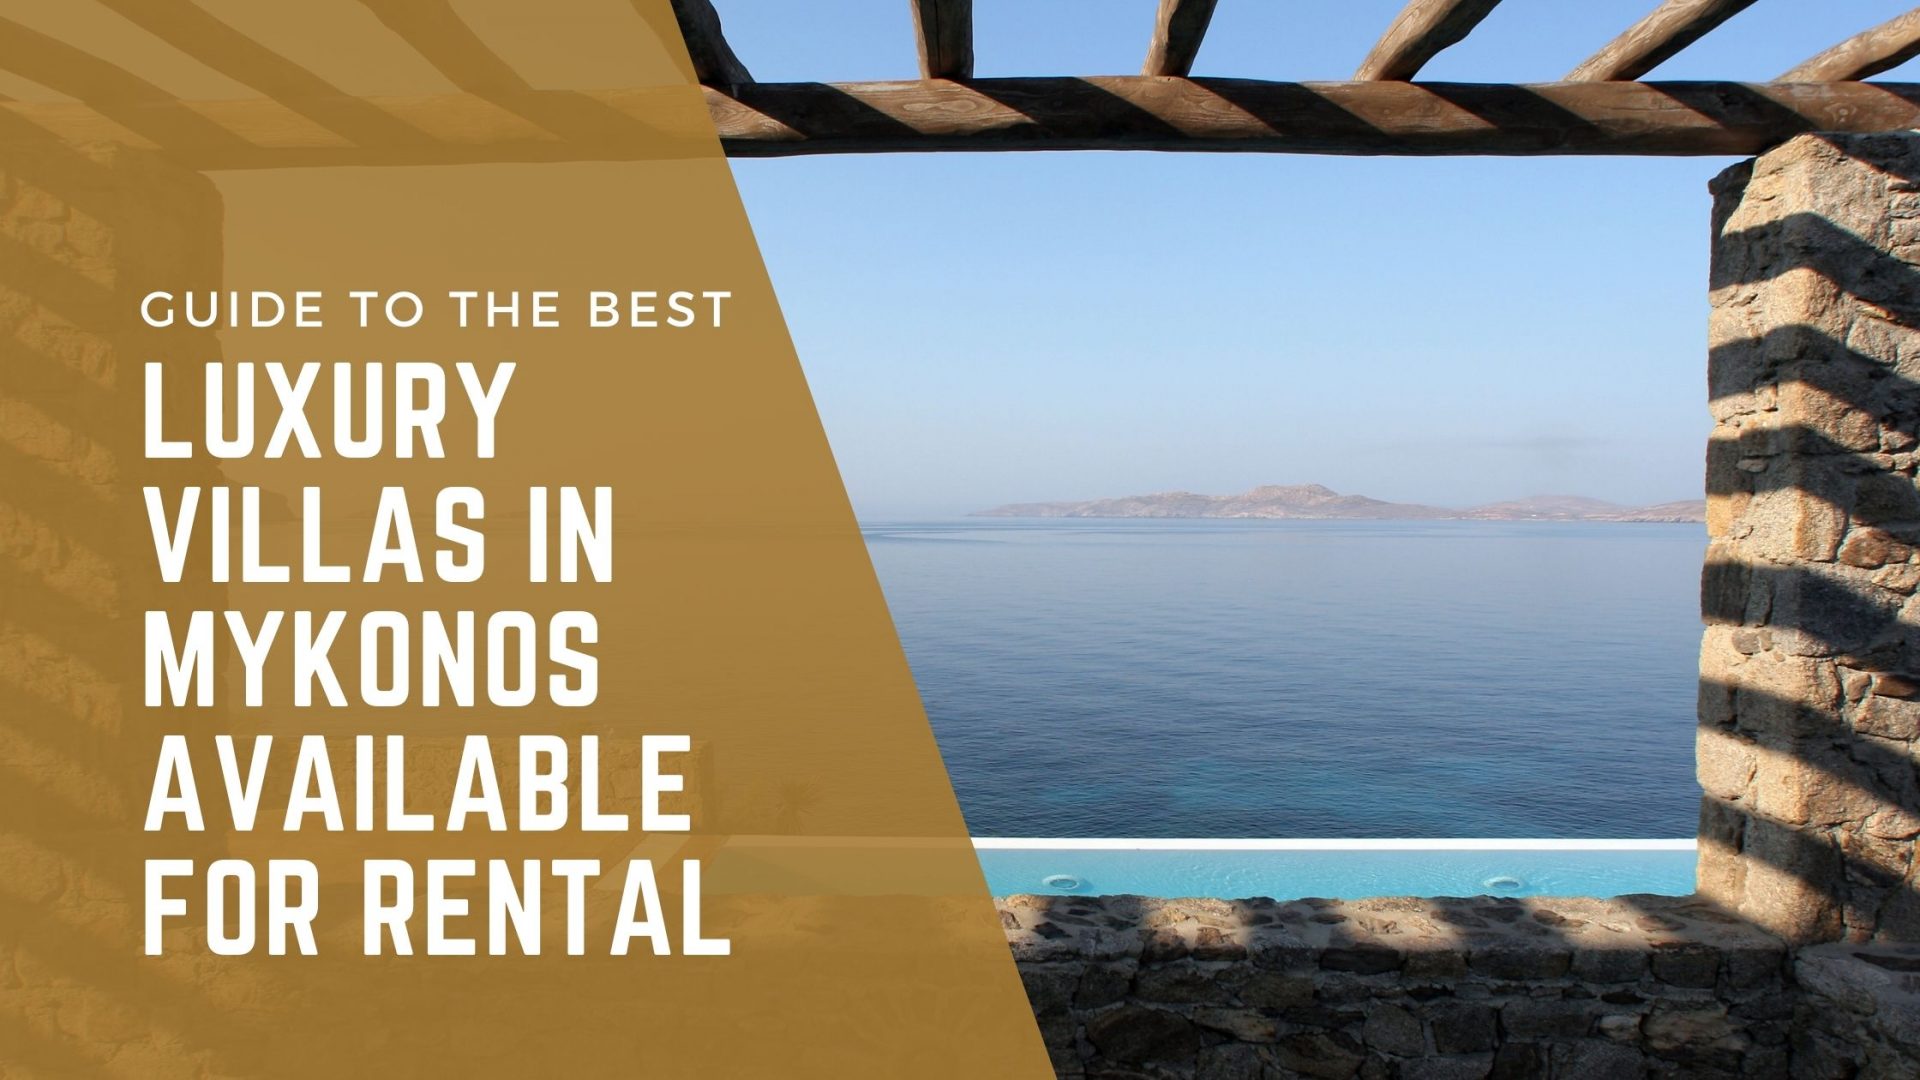 Guide To The Best Luxury Villas In Mykonos Available For Rental